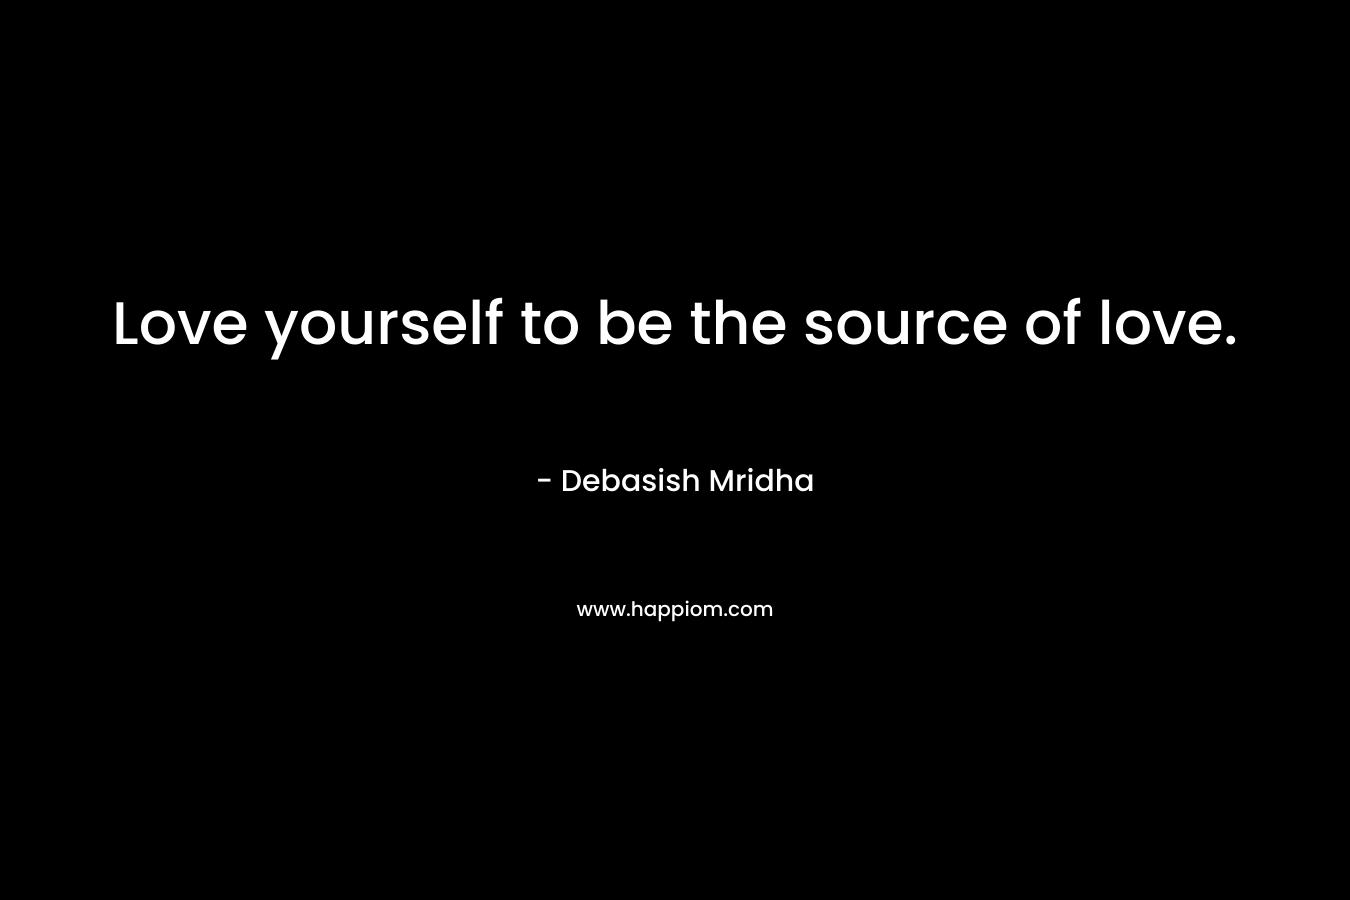 Love yourself to be the source of love.